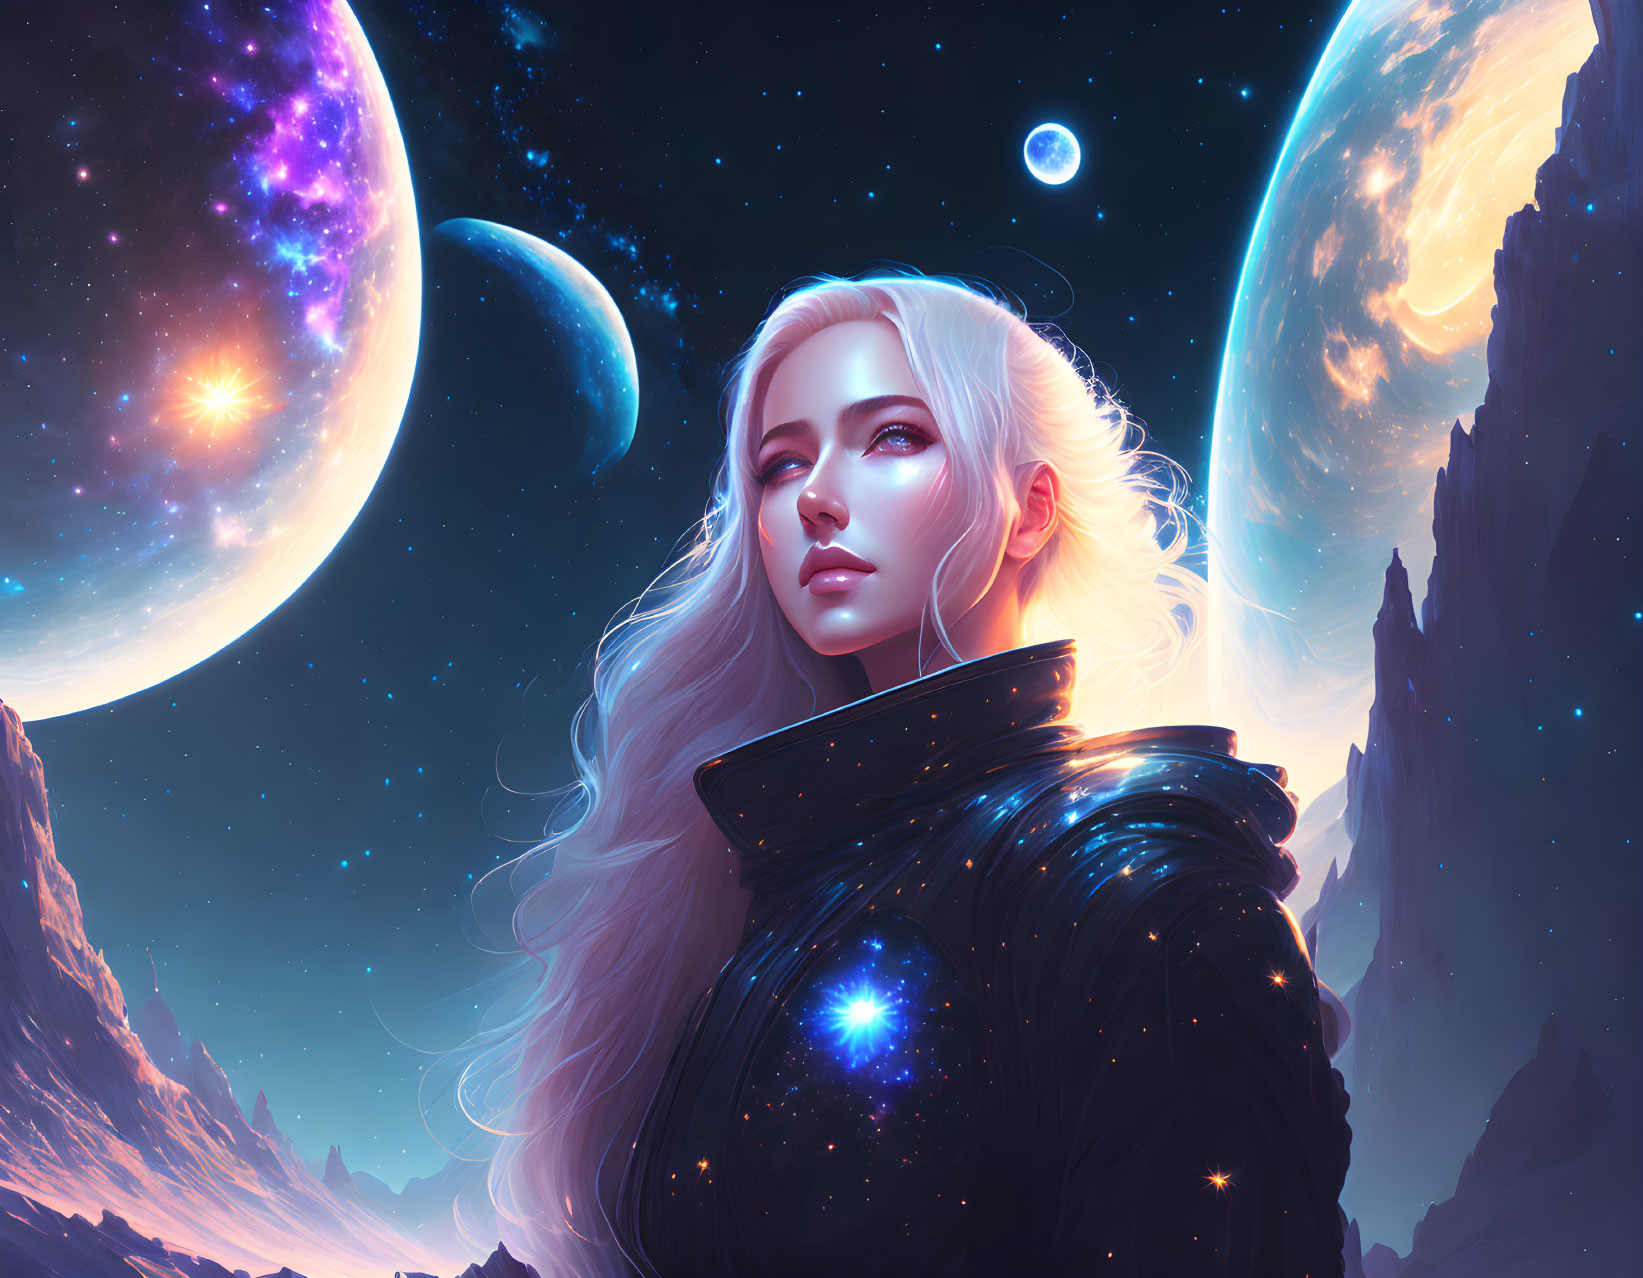 Blonde woman gazing at cosmic backdrop with stars and planets